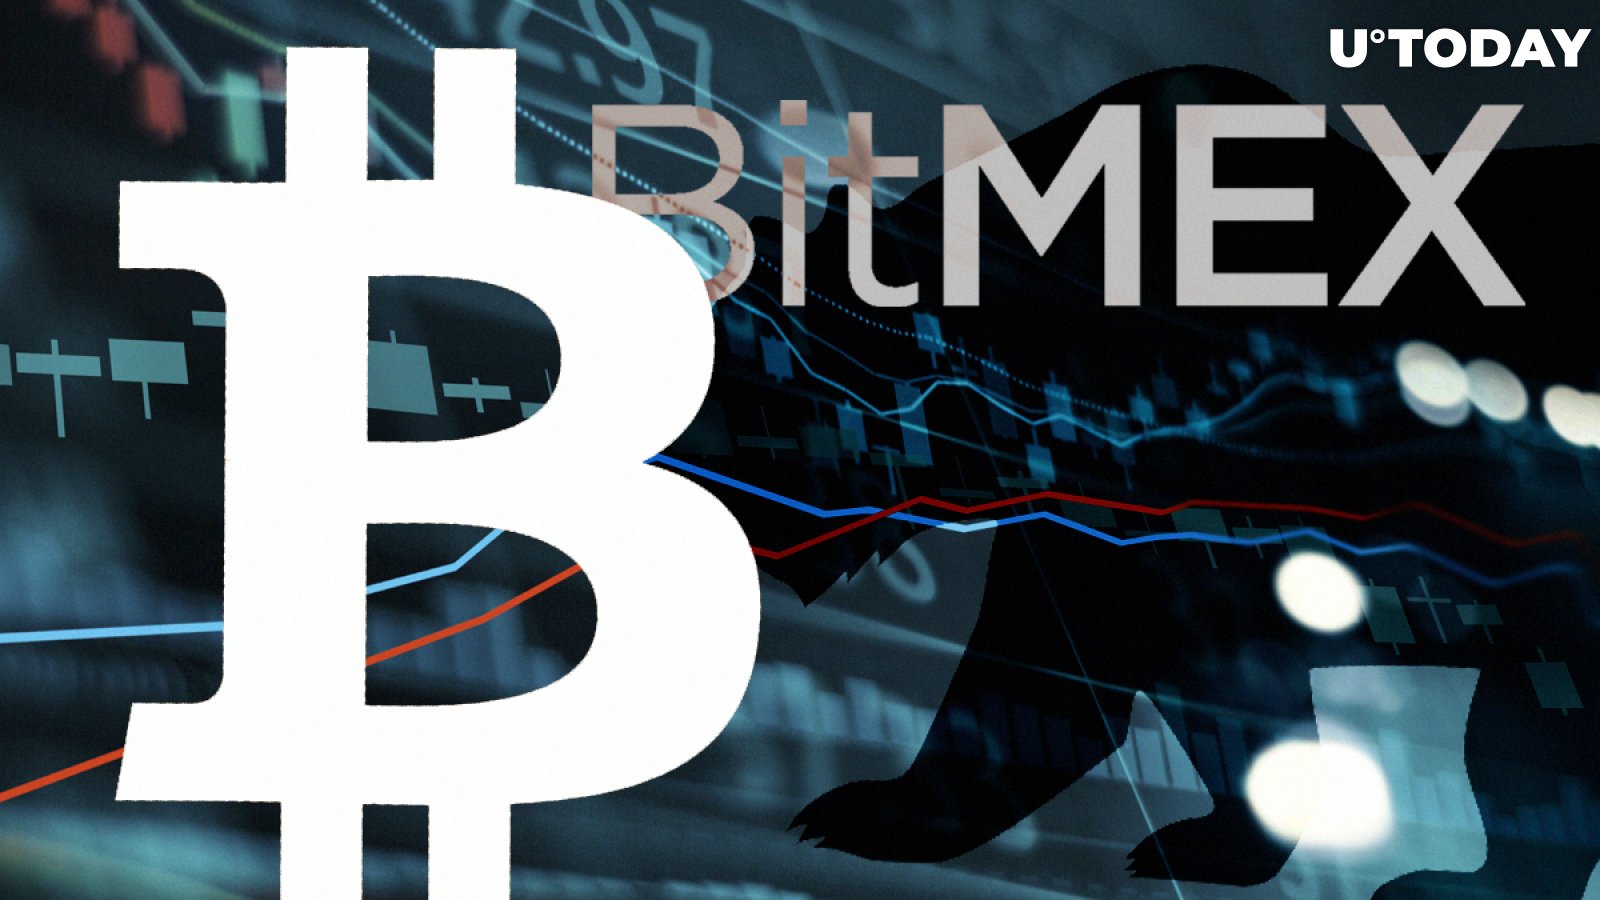 BitMEX Data Shows BTC Price Could Soon Experience Major Volatile Move as Market Sentiment Turns Bearish